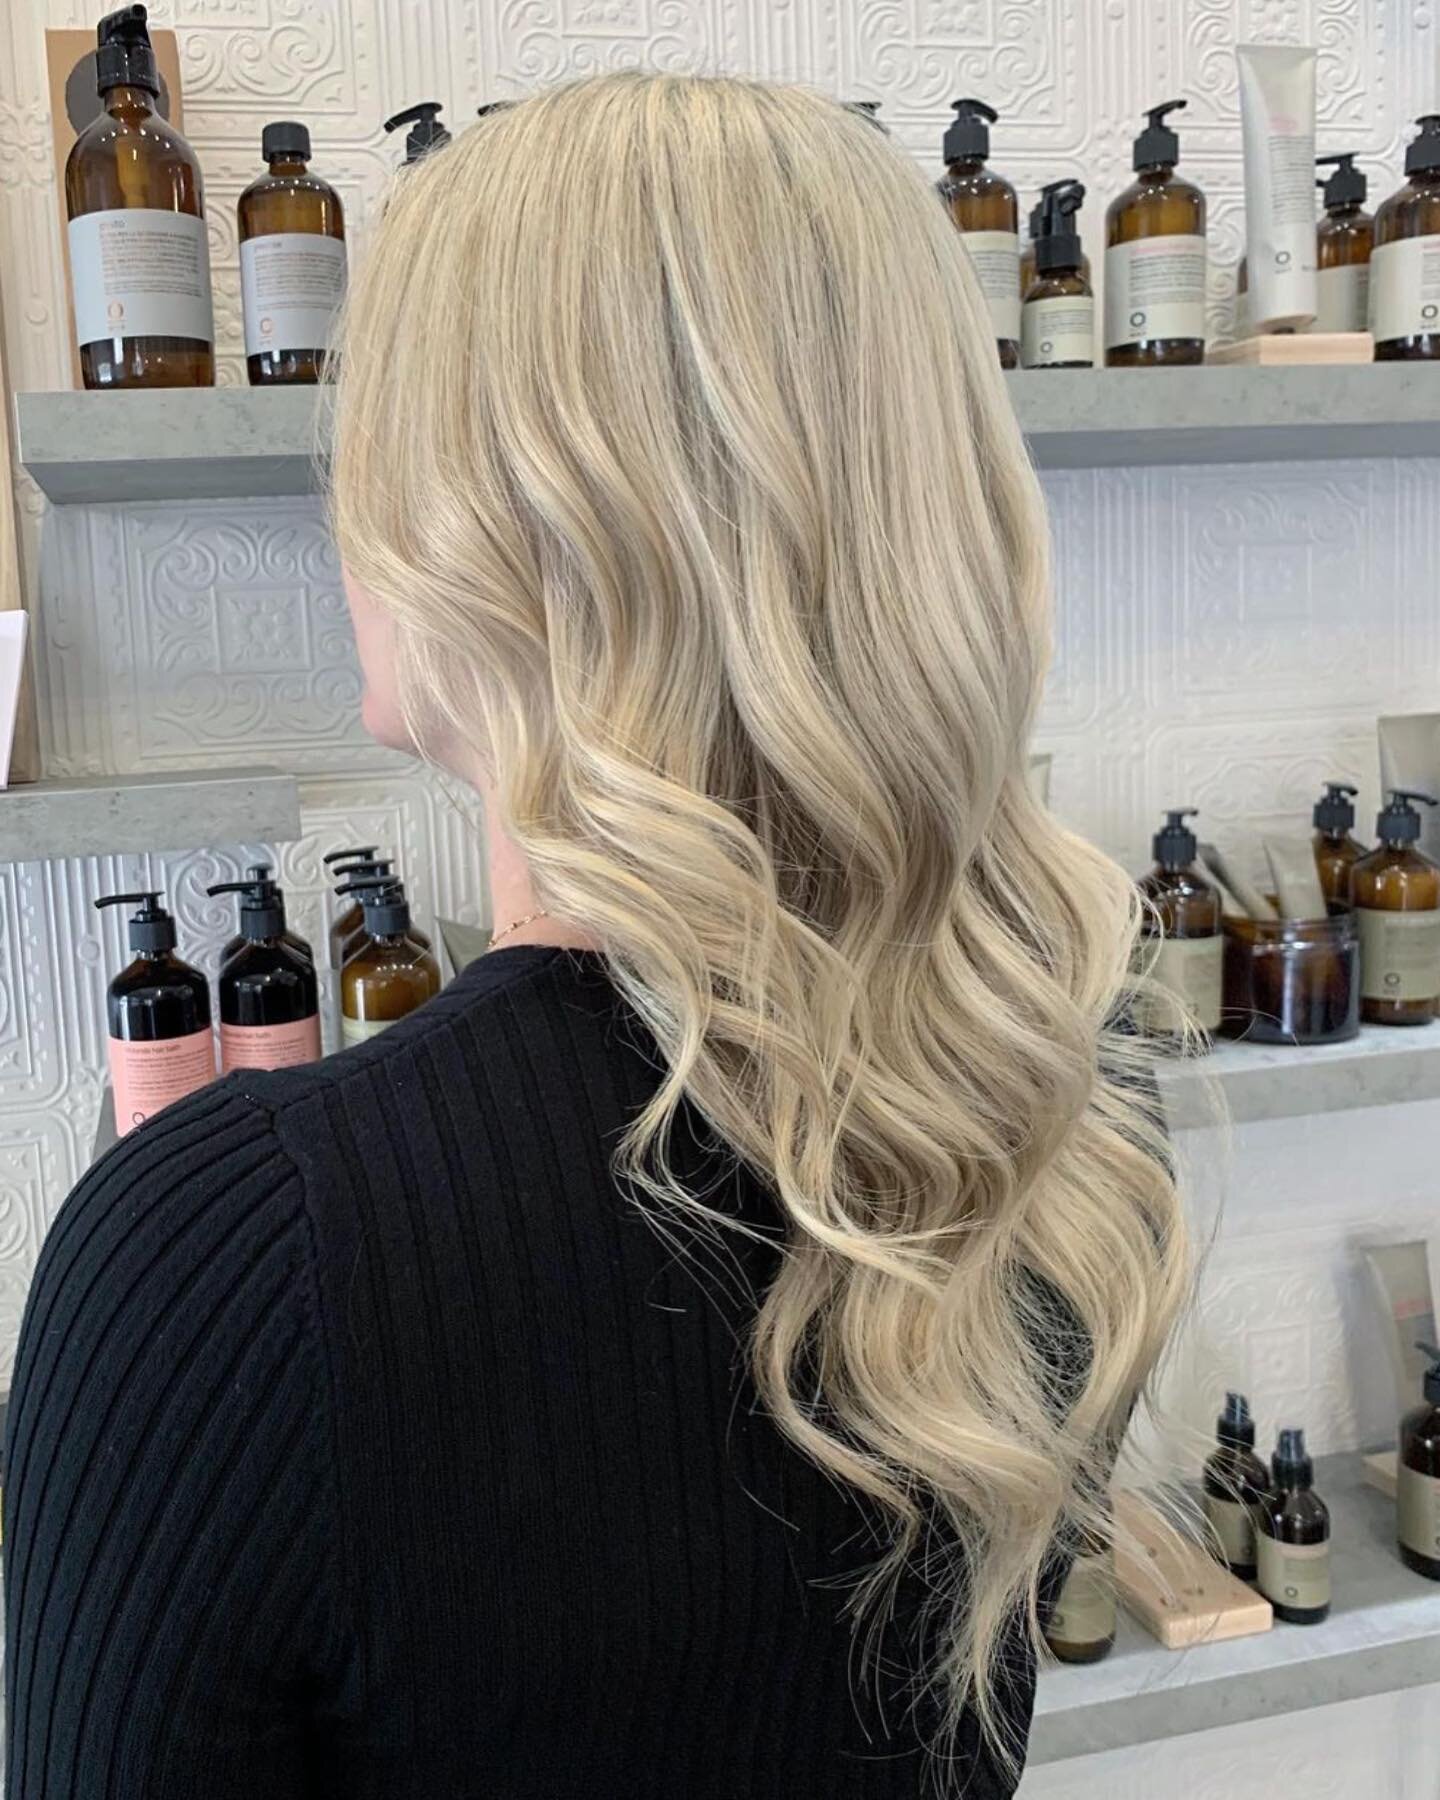 CLEAN BLONDE | BY ANNA

✨Check out this beautiful shiny colour by @anna_na_style 😍 

Thanks to the precious oils in @owayofficial Hbleach lightening butter, the structure of the hair fiber gets nourished, restored and leaves the hair soft and full o